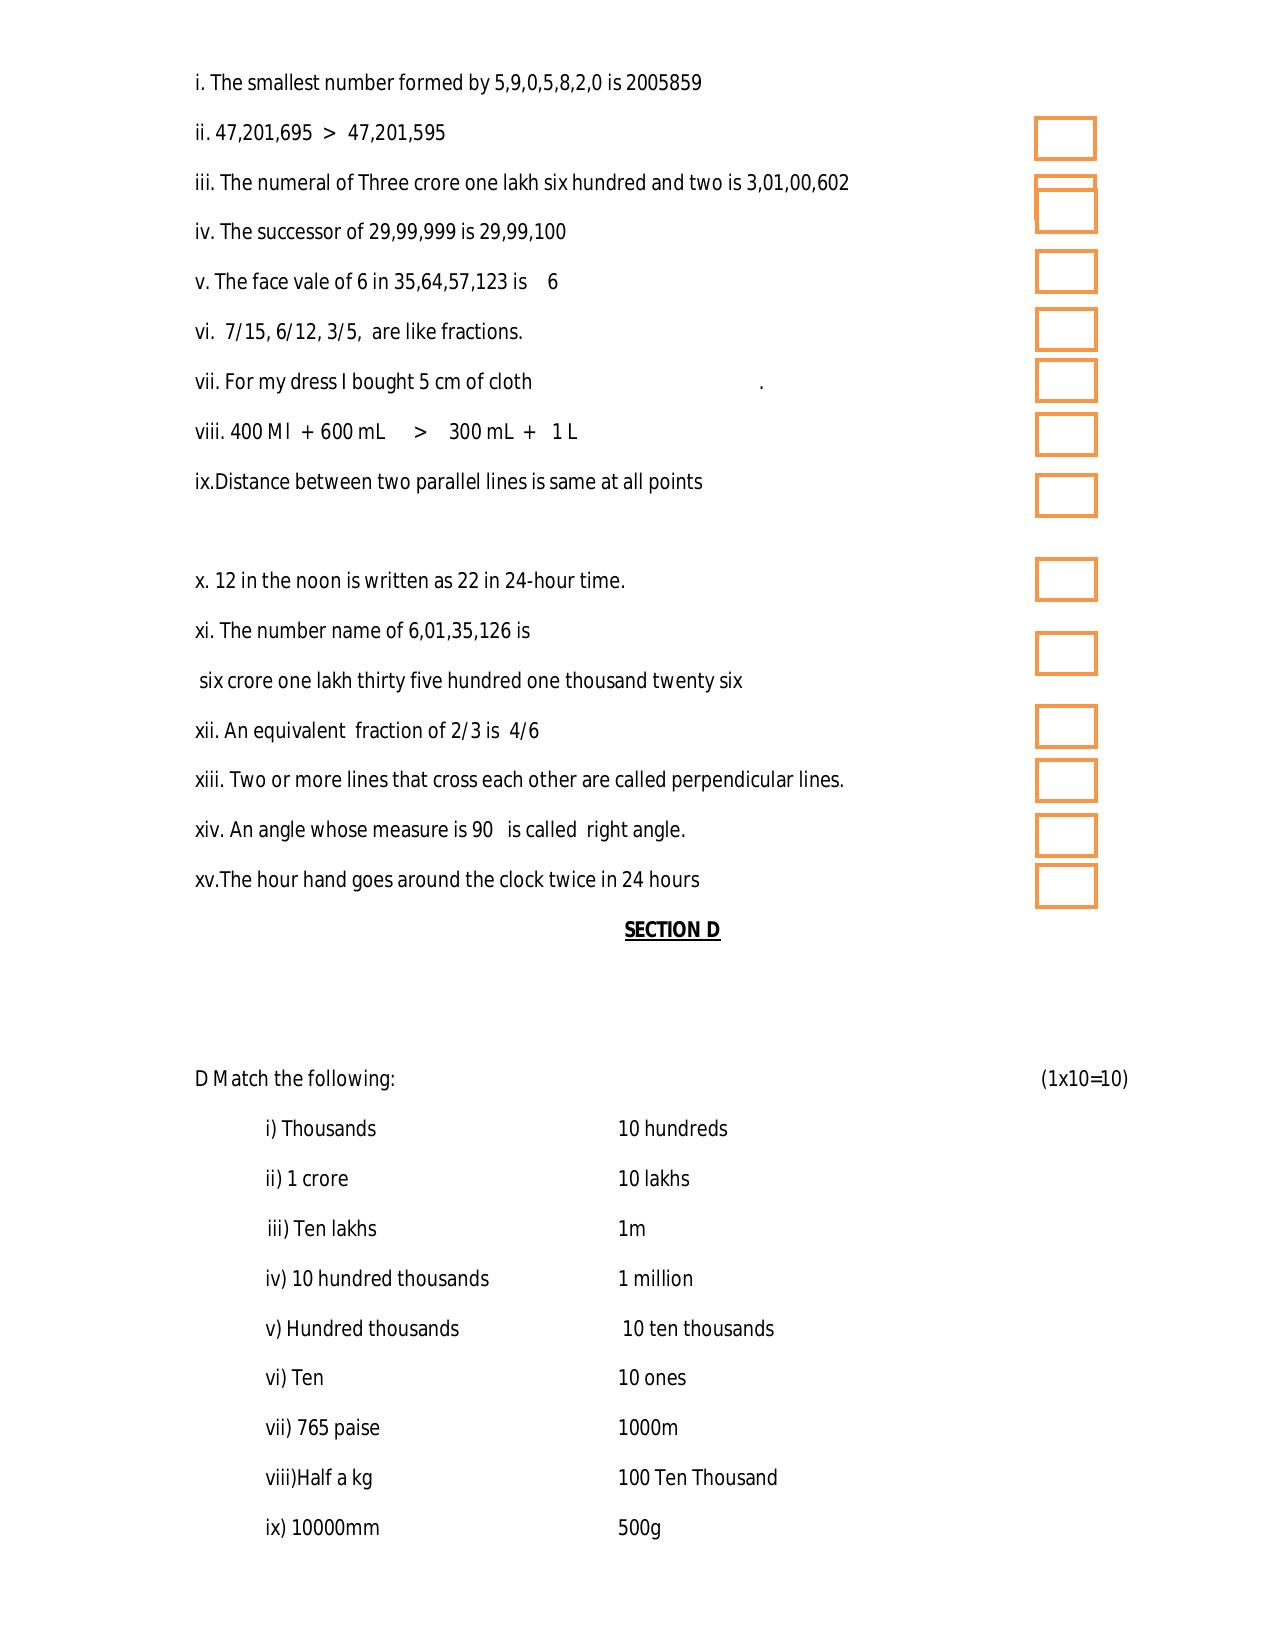 Worksheet for Class 5 Maths Assignment 15 - Page 4